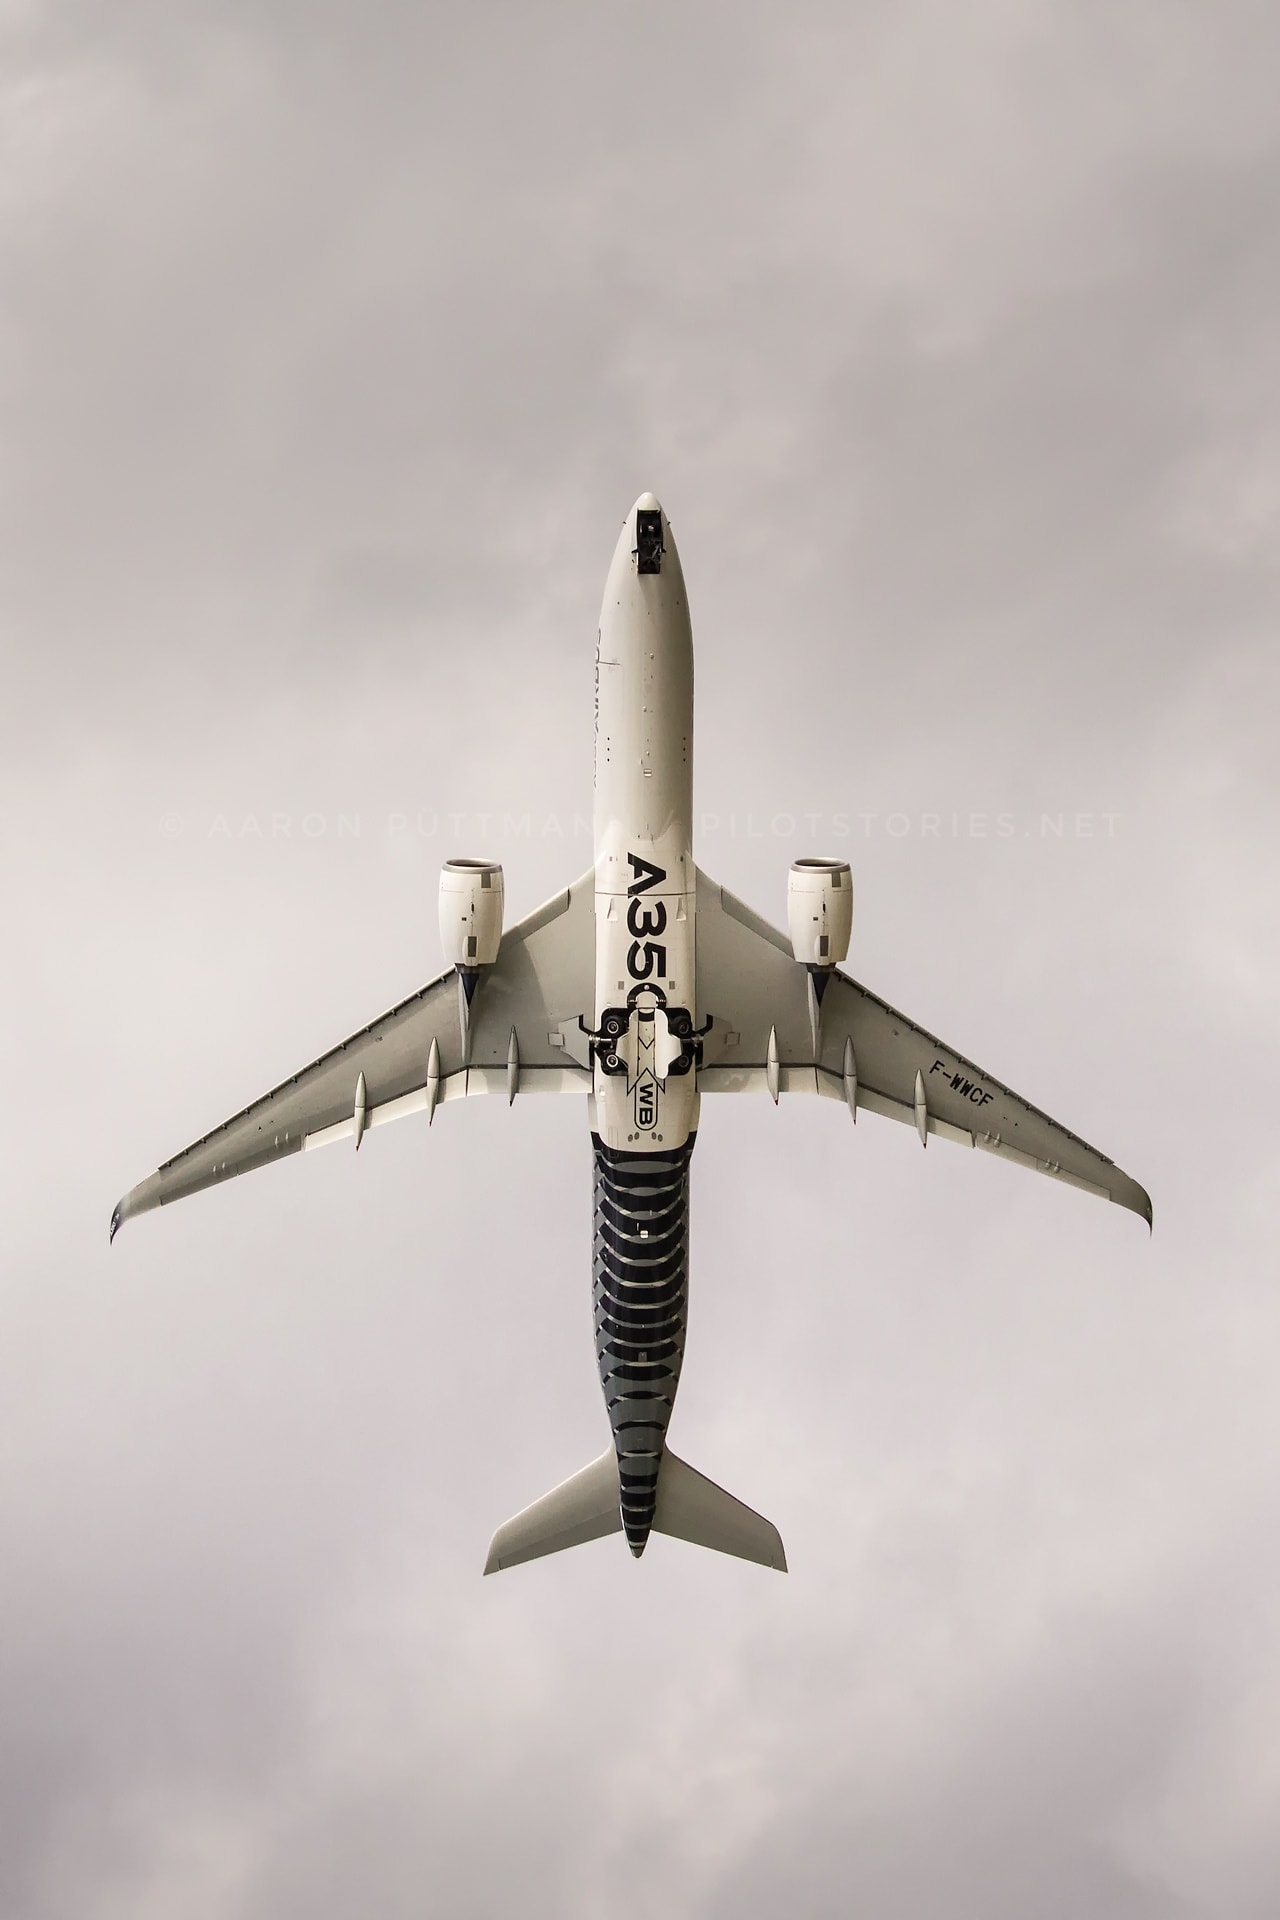 Aircraft Wallpaper For Your Smartphone Full HD Pilotstories